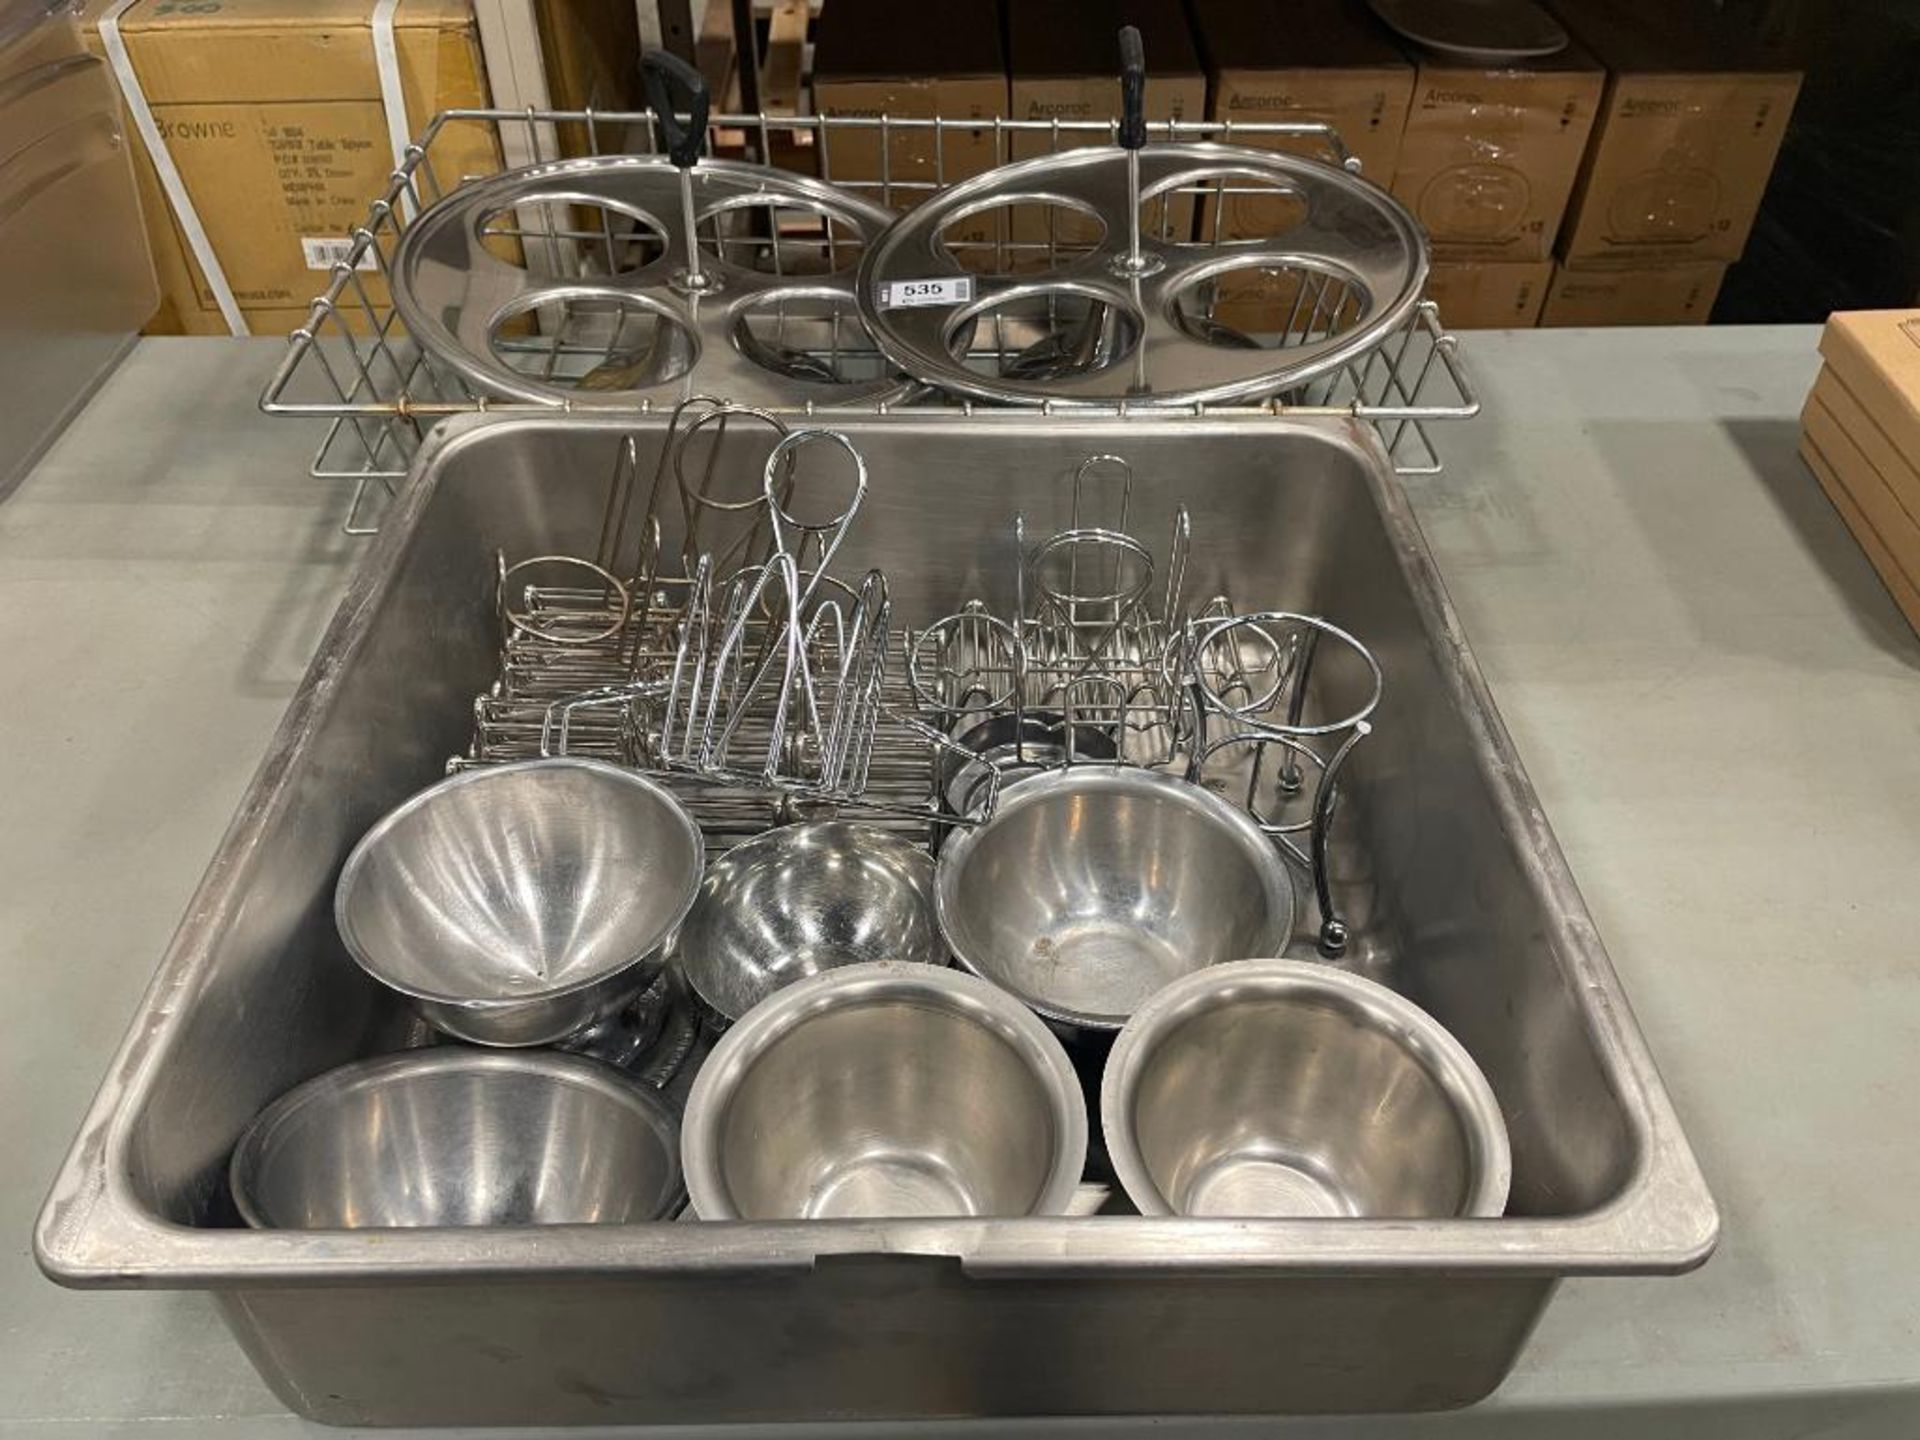 LOT OF TABLE CADDIES & STAINLESS STEEL SAUCE BOWLS